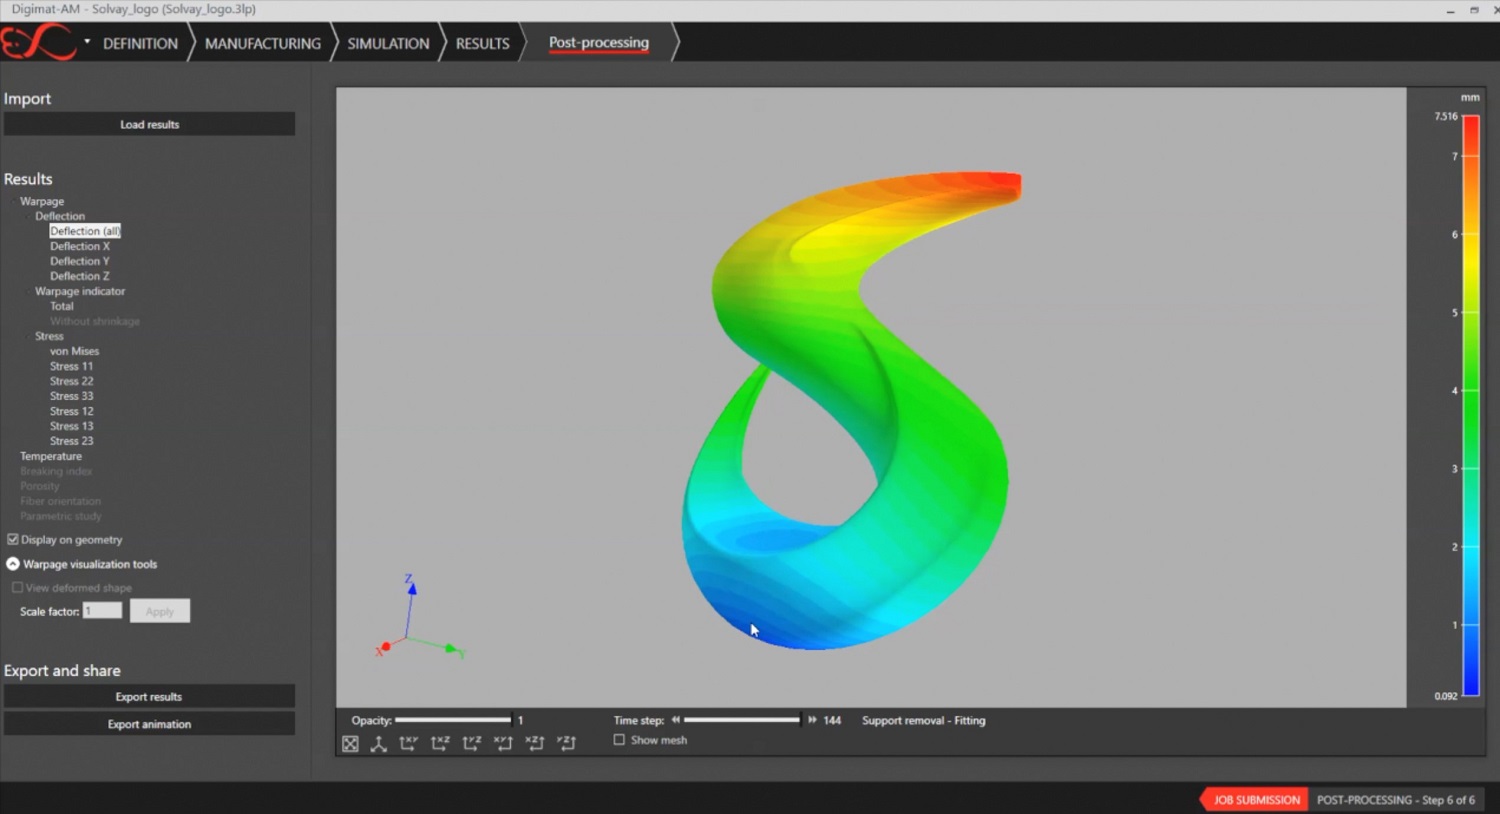 Digimat Additive Manufacturing (AM) software made by e-Xstream engineering.